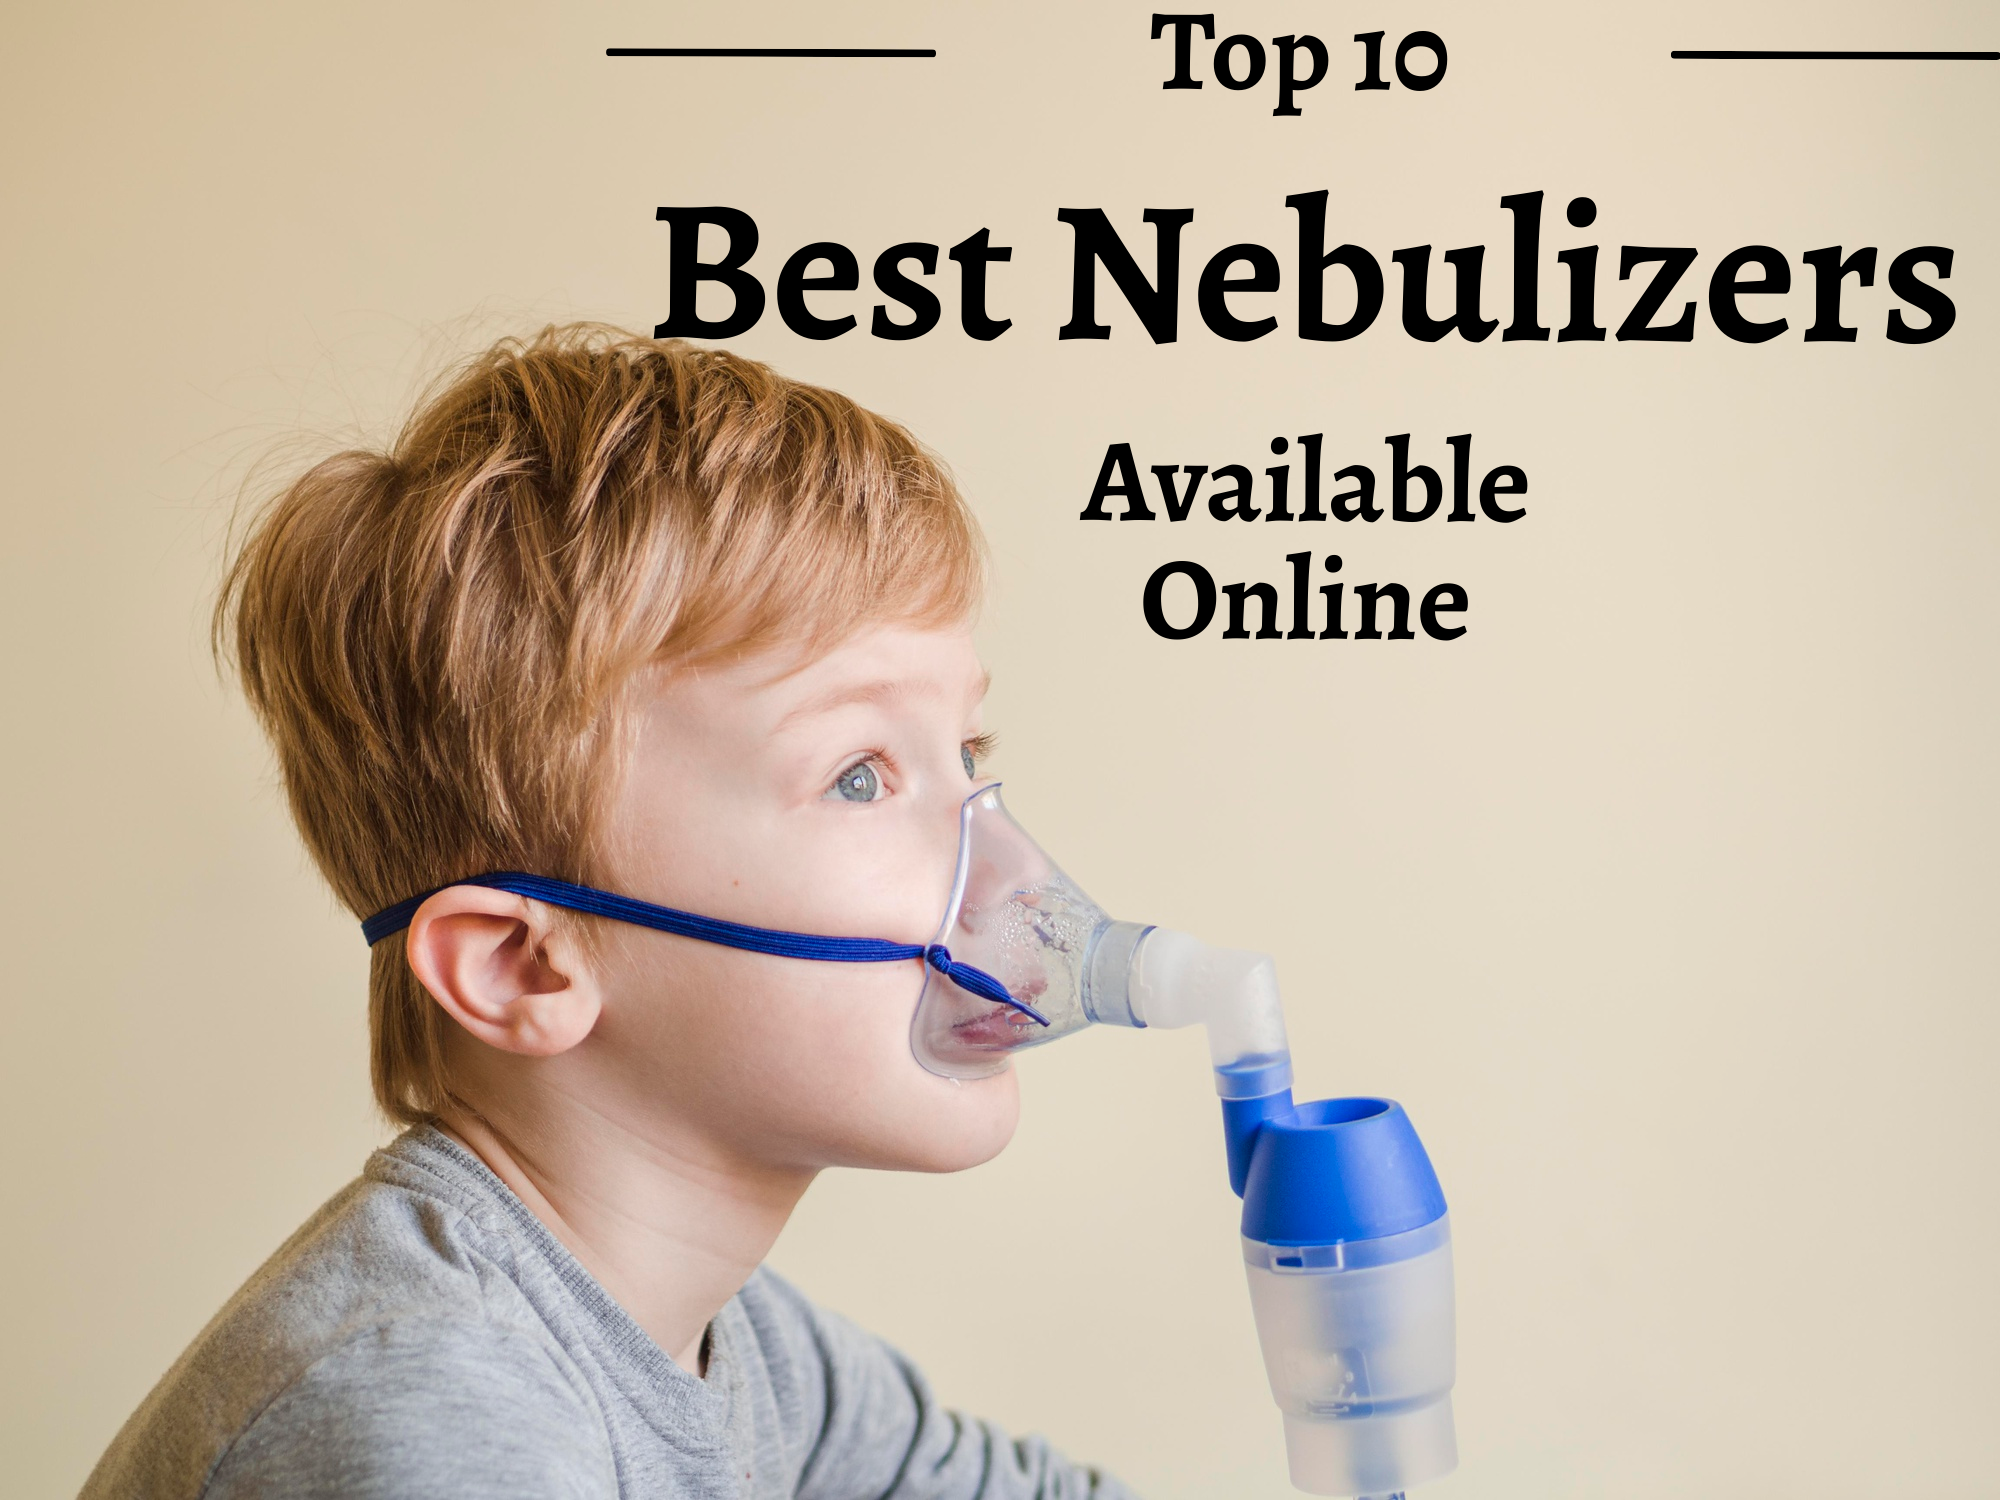 Top 10 Nebulizers Available Online